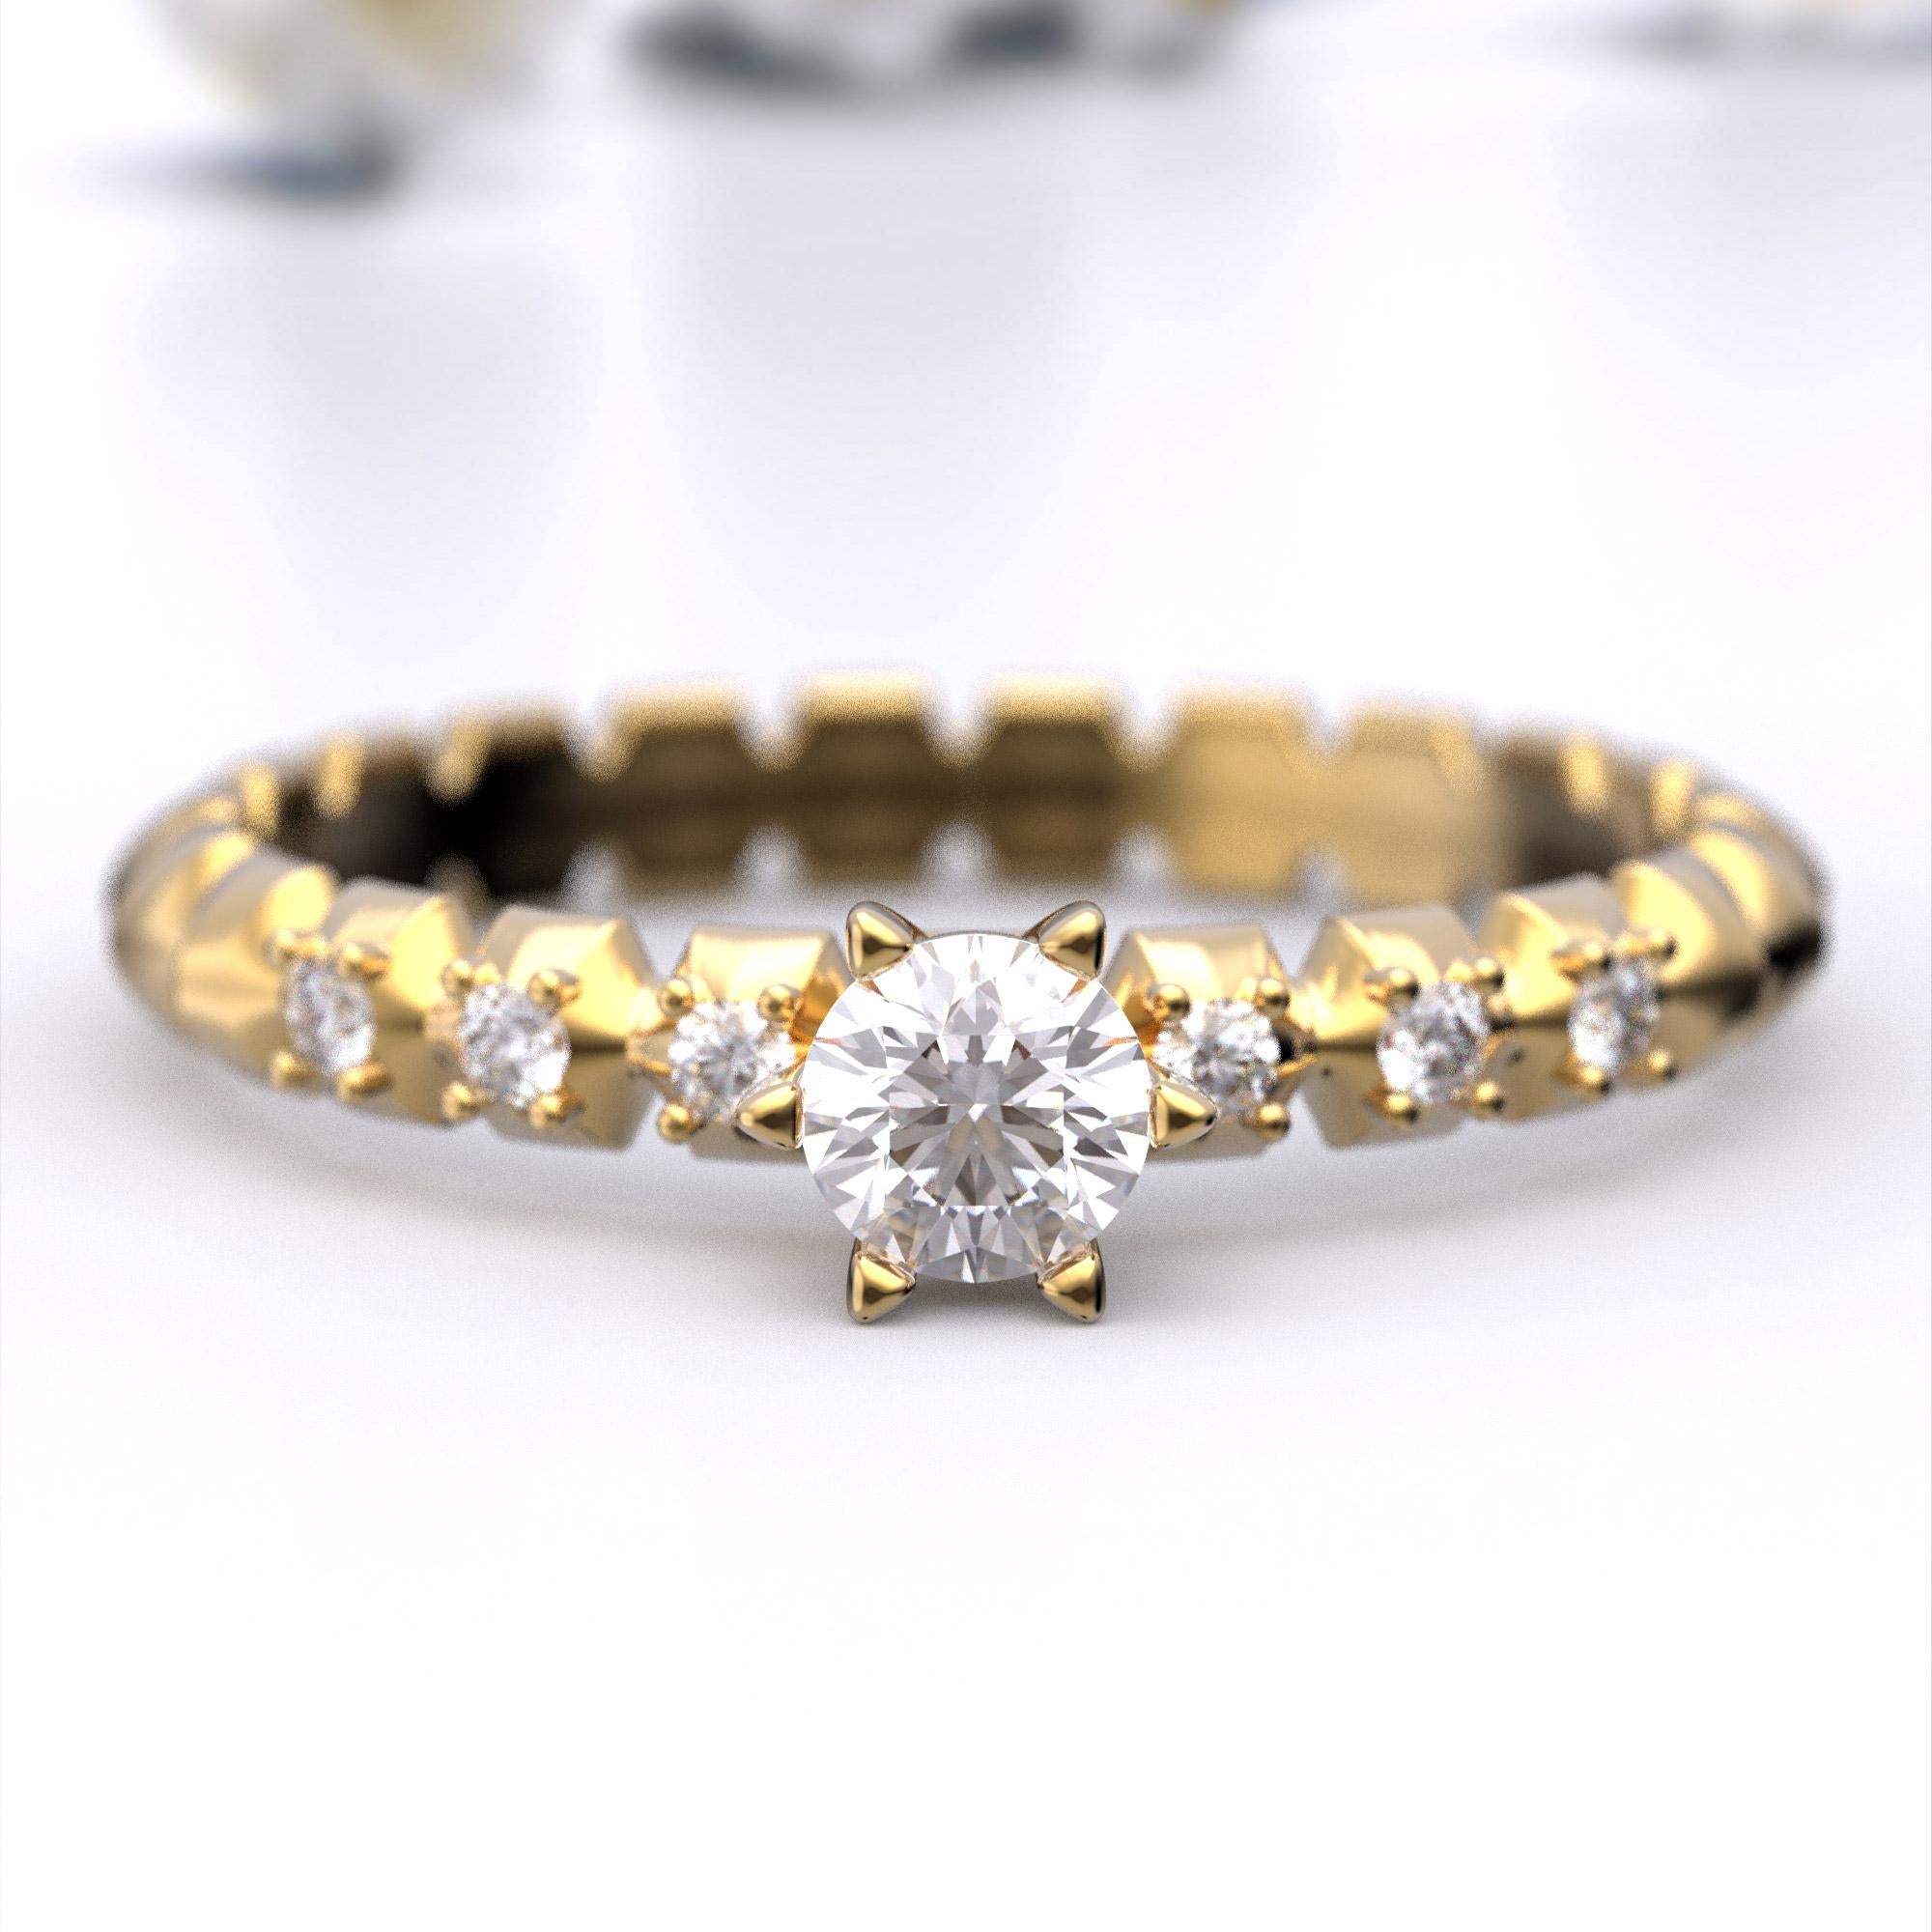 For Sale:  Italian-Made 0.32 Carat Diamond Engagement Ring in 14k Solid Gold 4